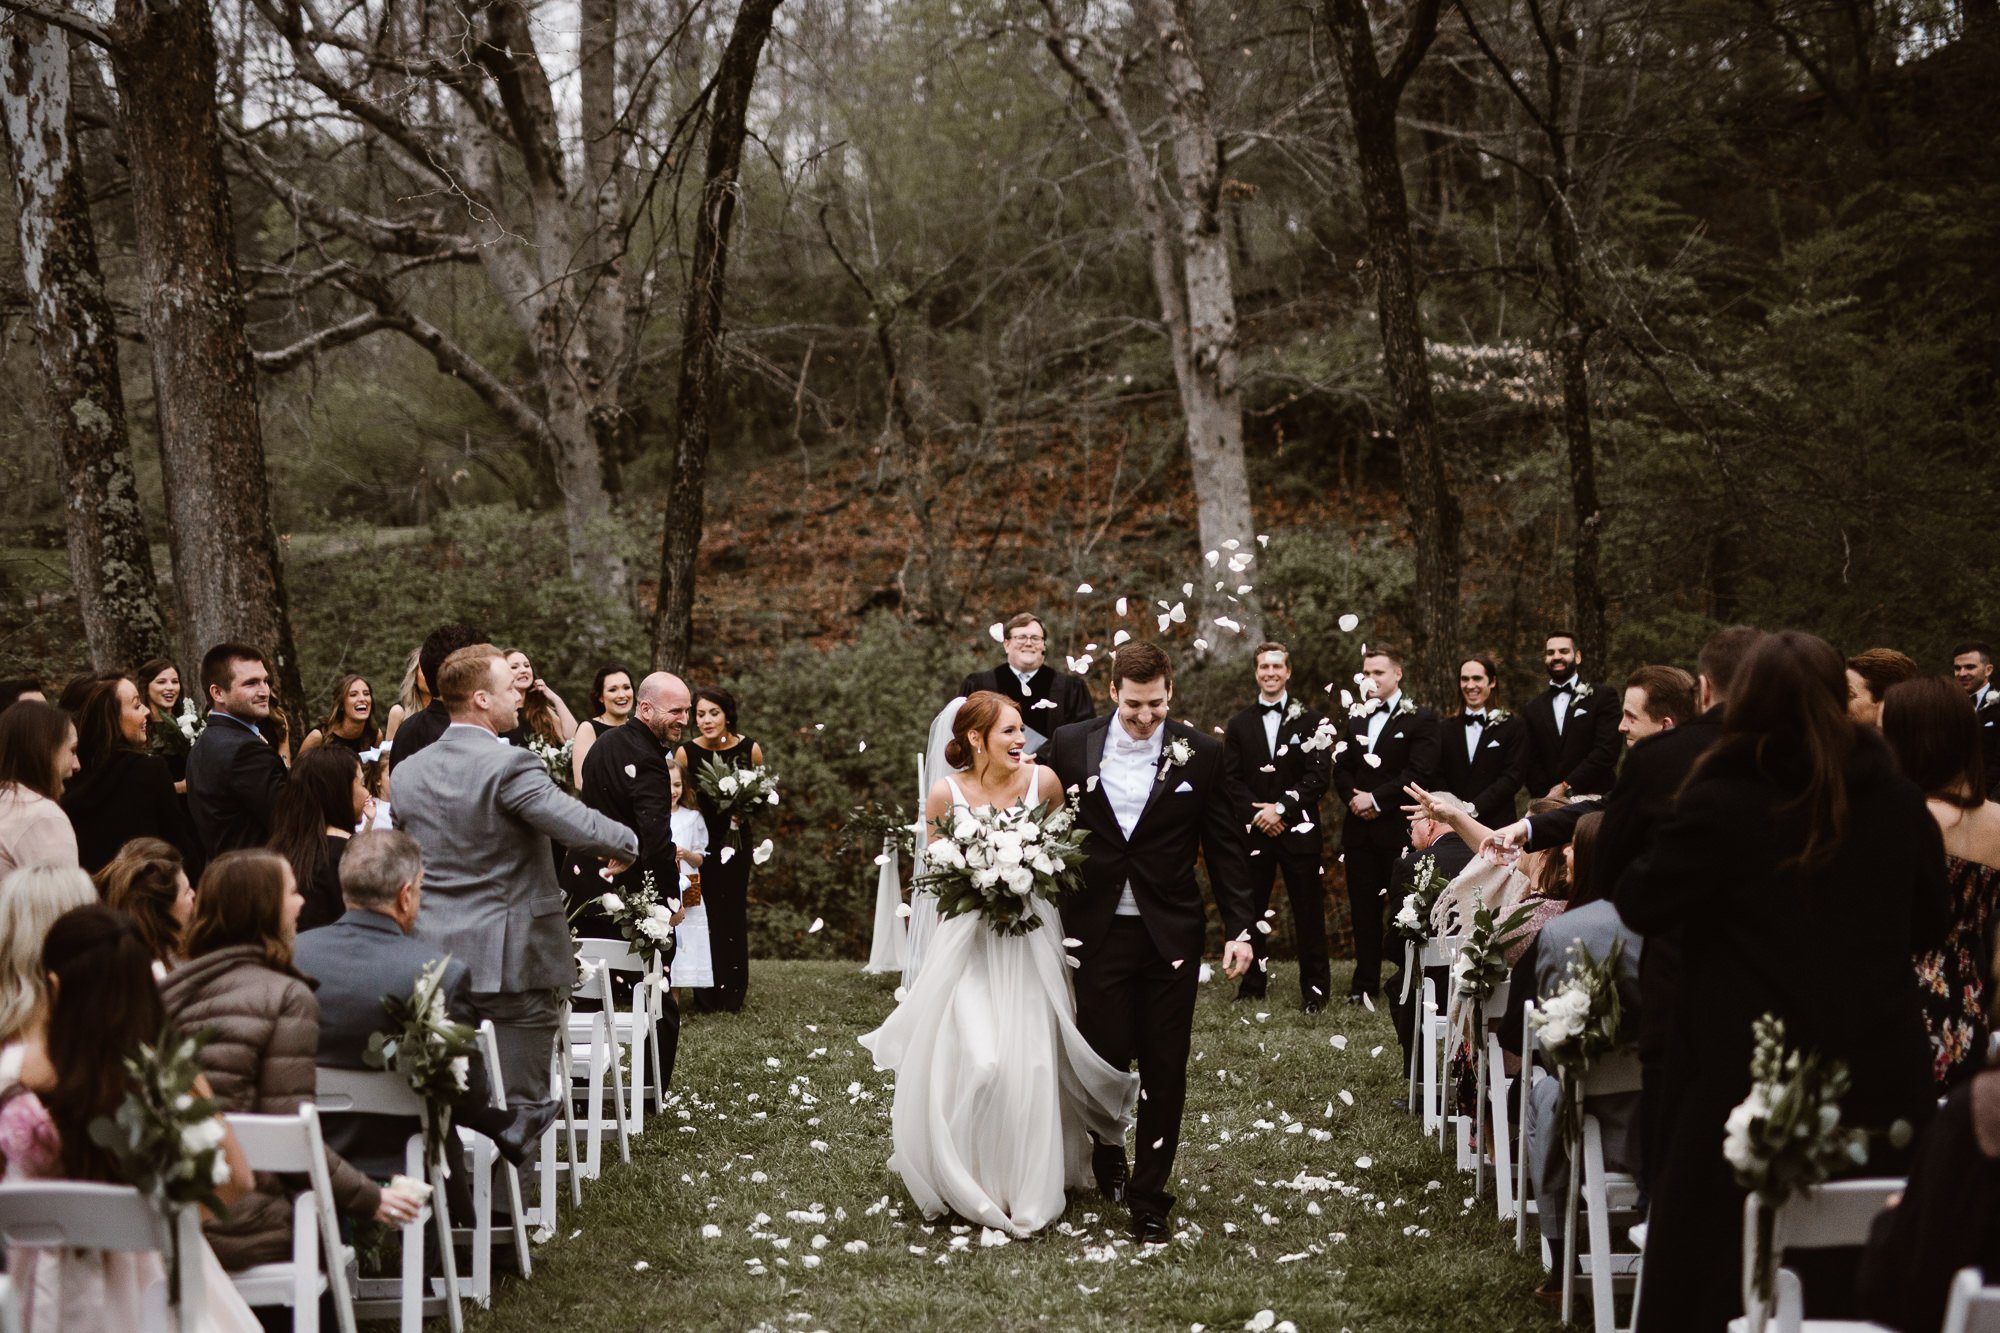 6 Tips for Planning a Dry Wedding Reception